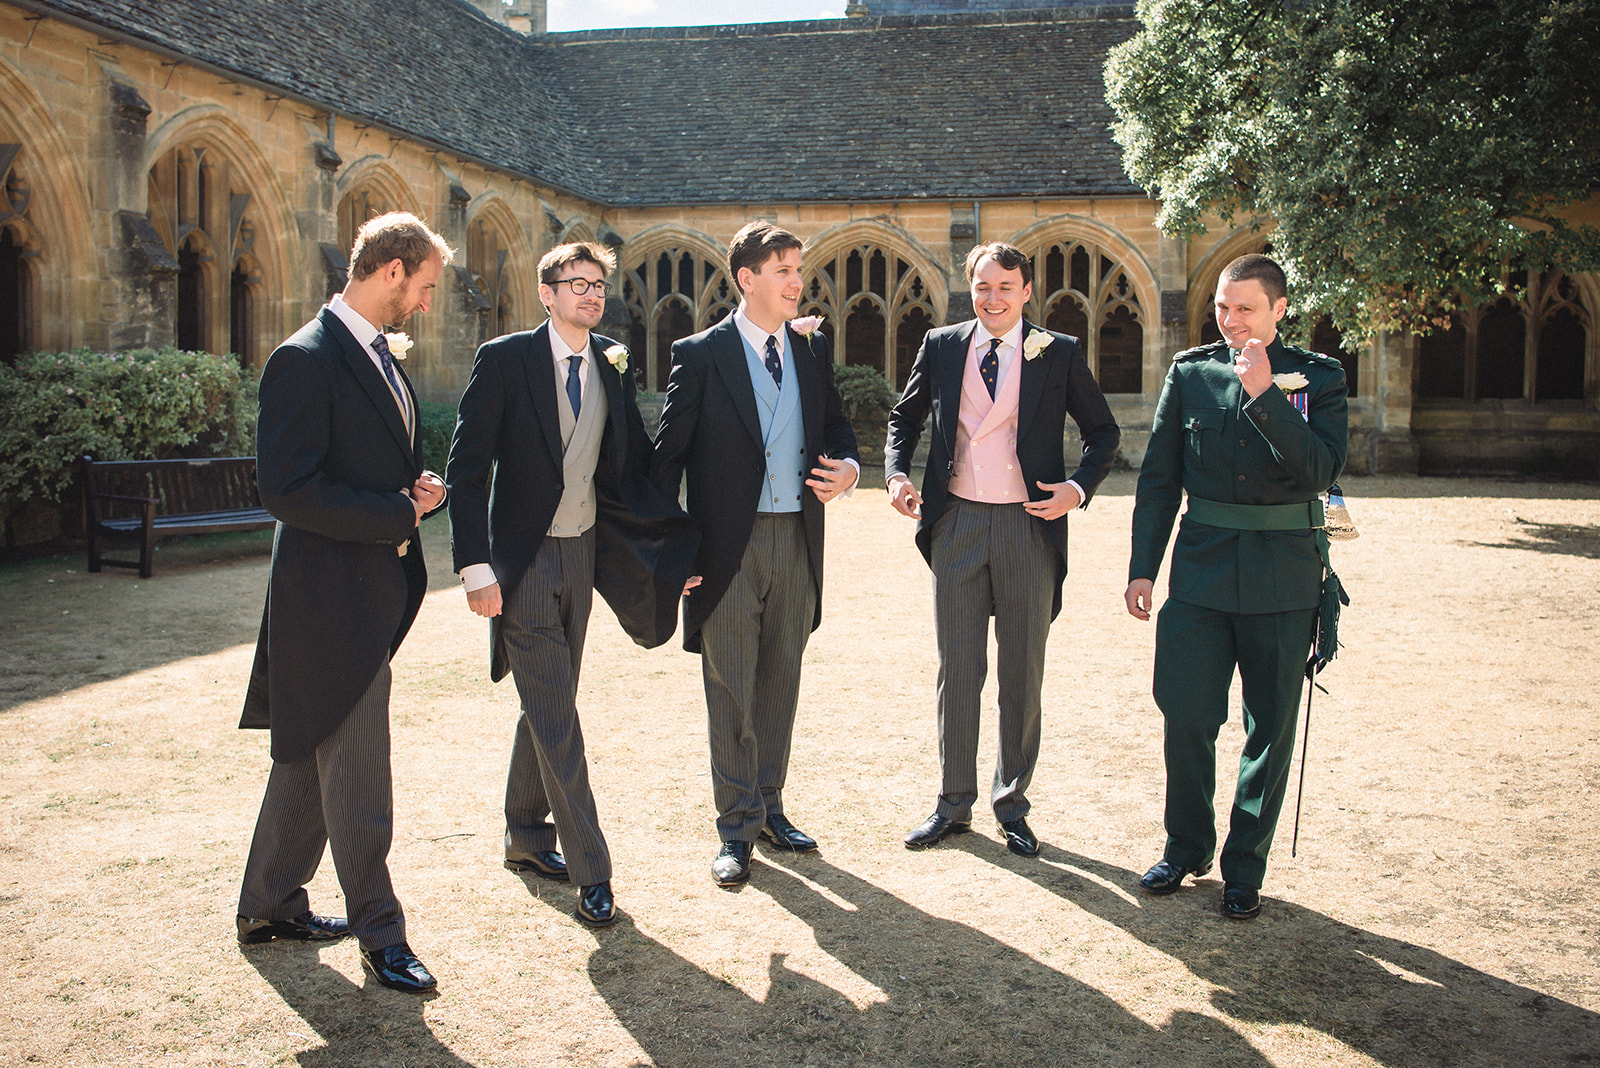 Candid portrait of Damien and the groom's men at the New College Chapel